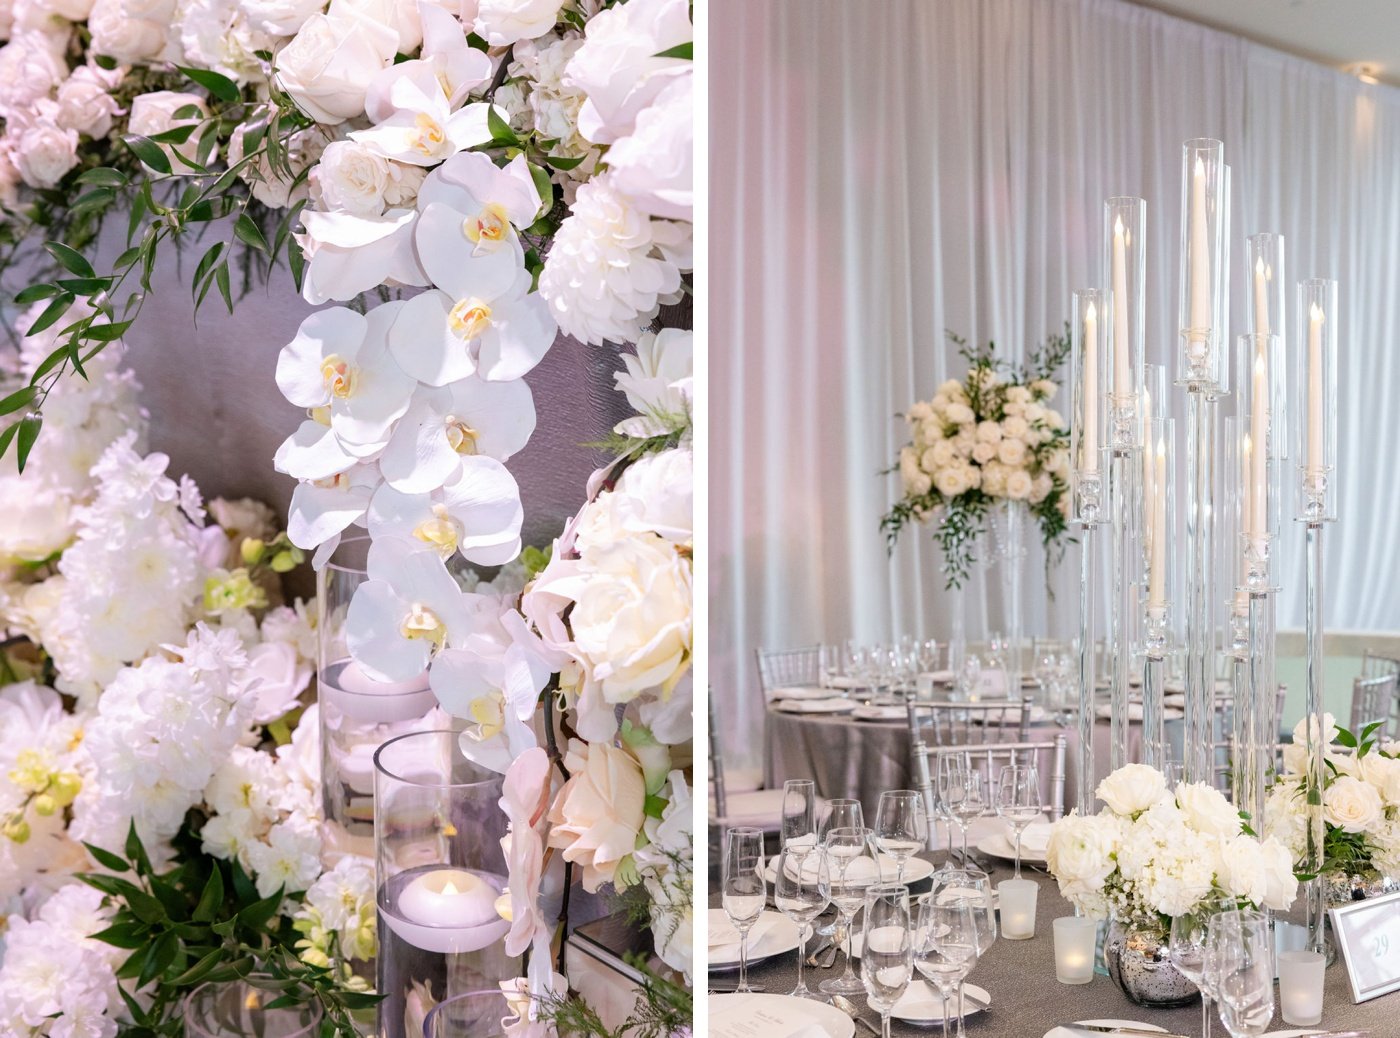 Floral installation with white orchids and floating candles at a wedding reception